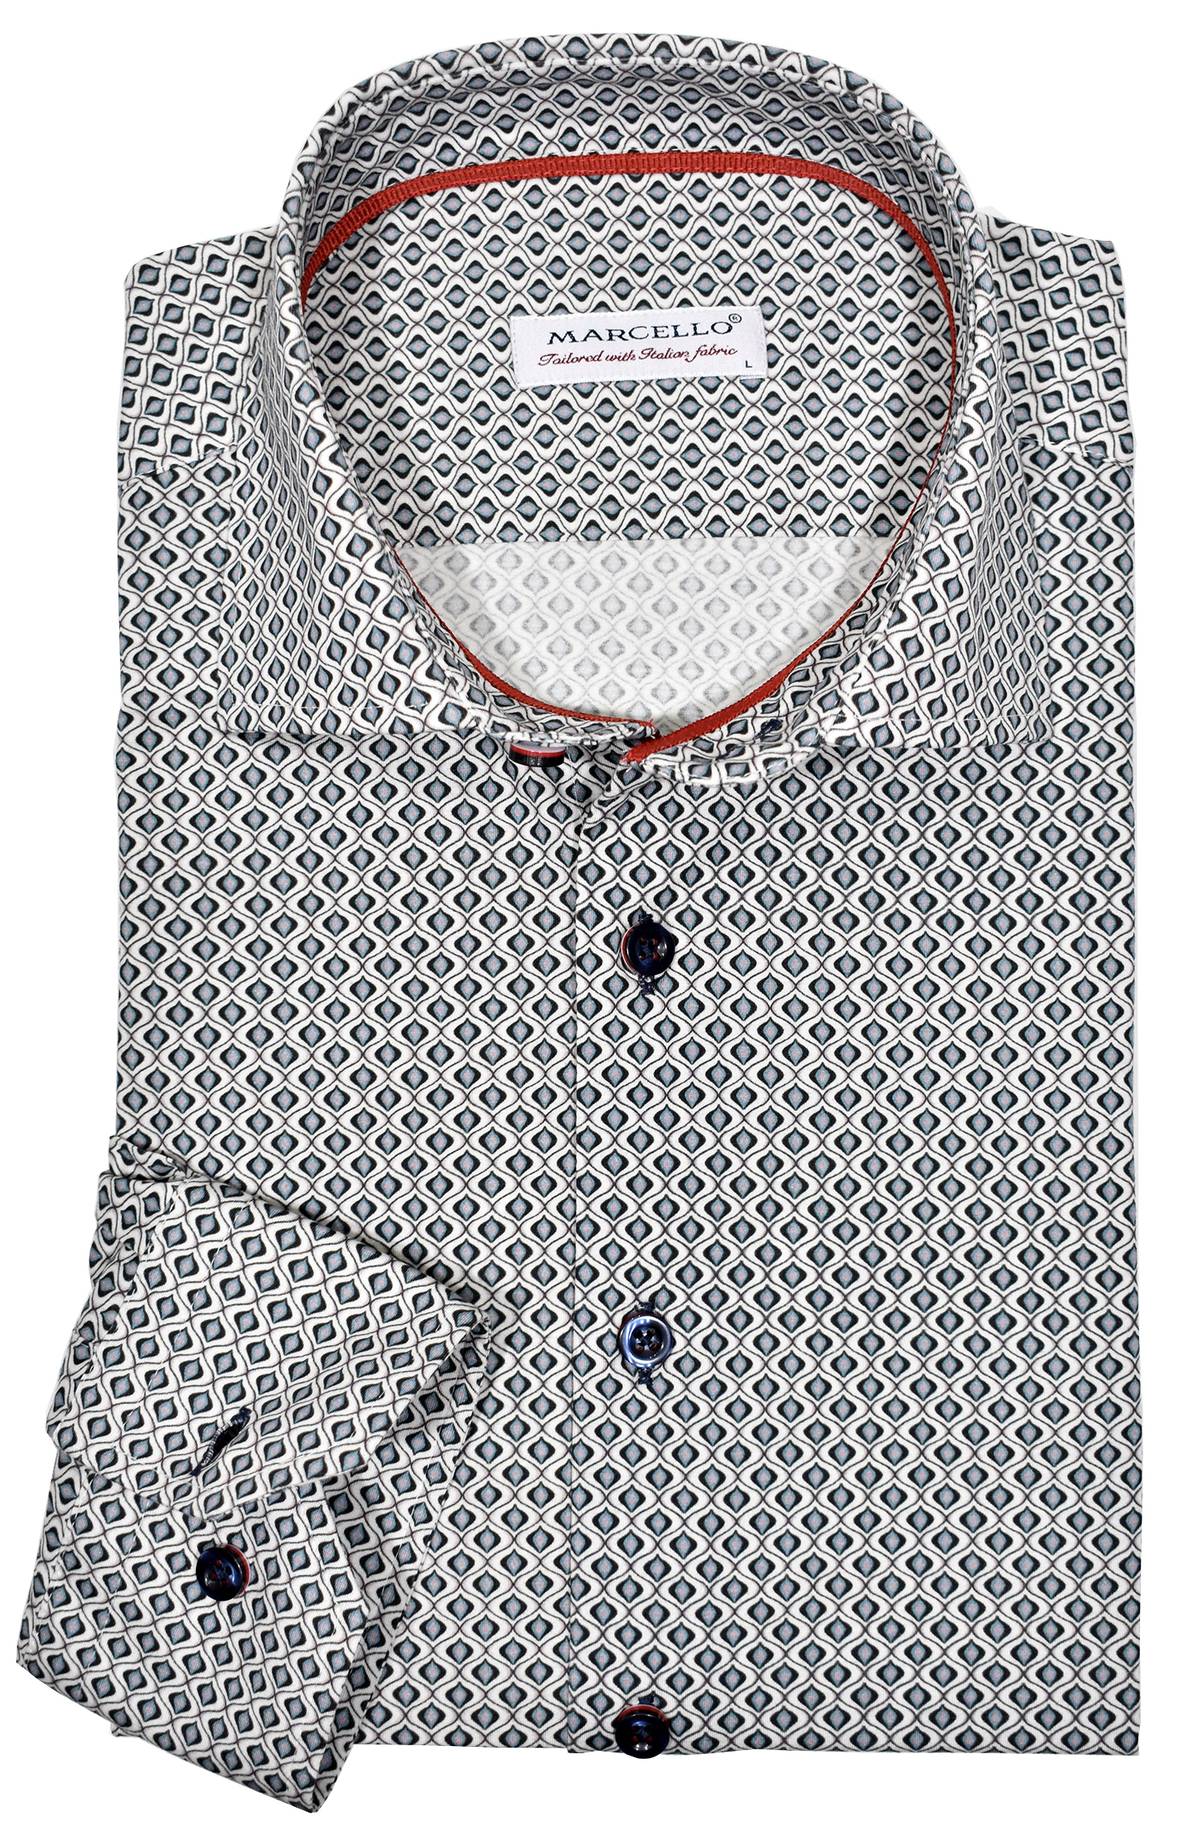 Soft cotton with a little stretch for added comfort. Slate grey abstract medallion pattern provides a unique look to update a traditional style.  A good choice to accompany black or gray family bottoms.  Custom hand selected buttons and cool red accent neck piping.   Classic shaped fit.